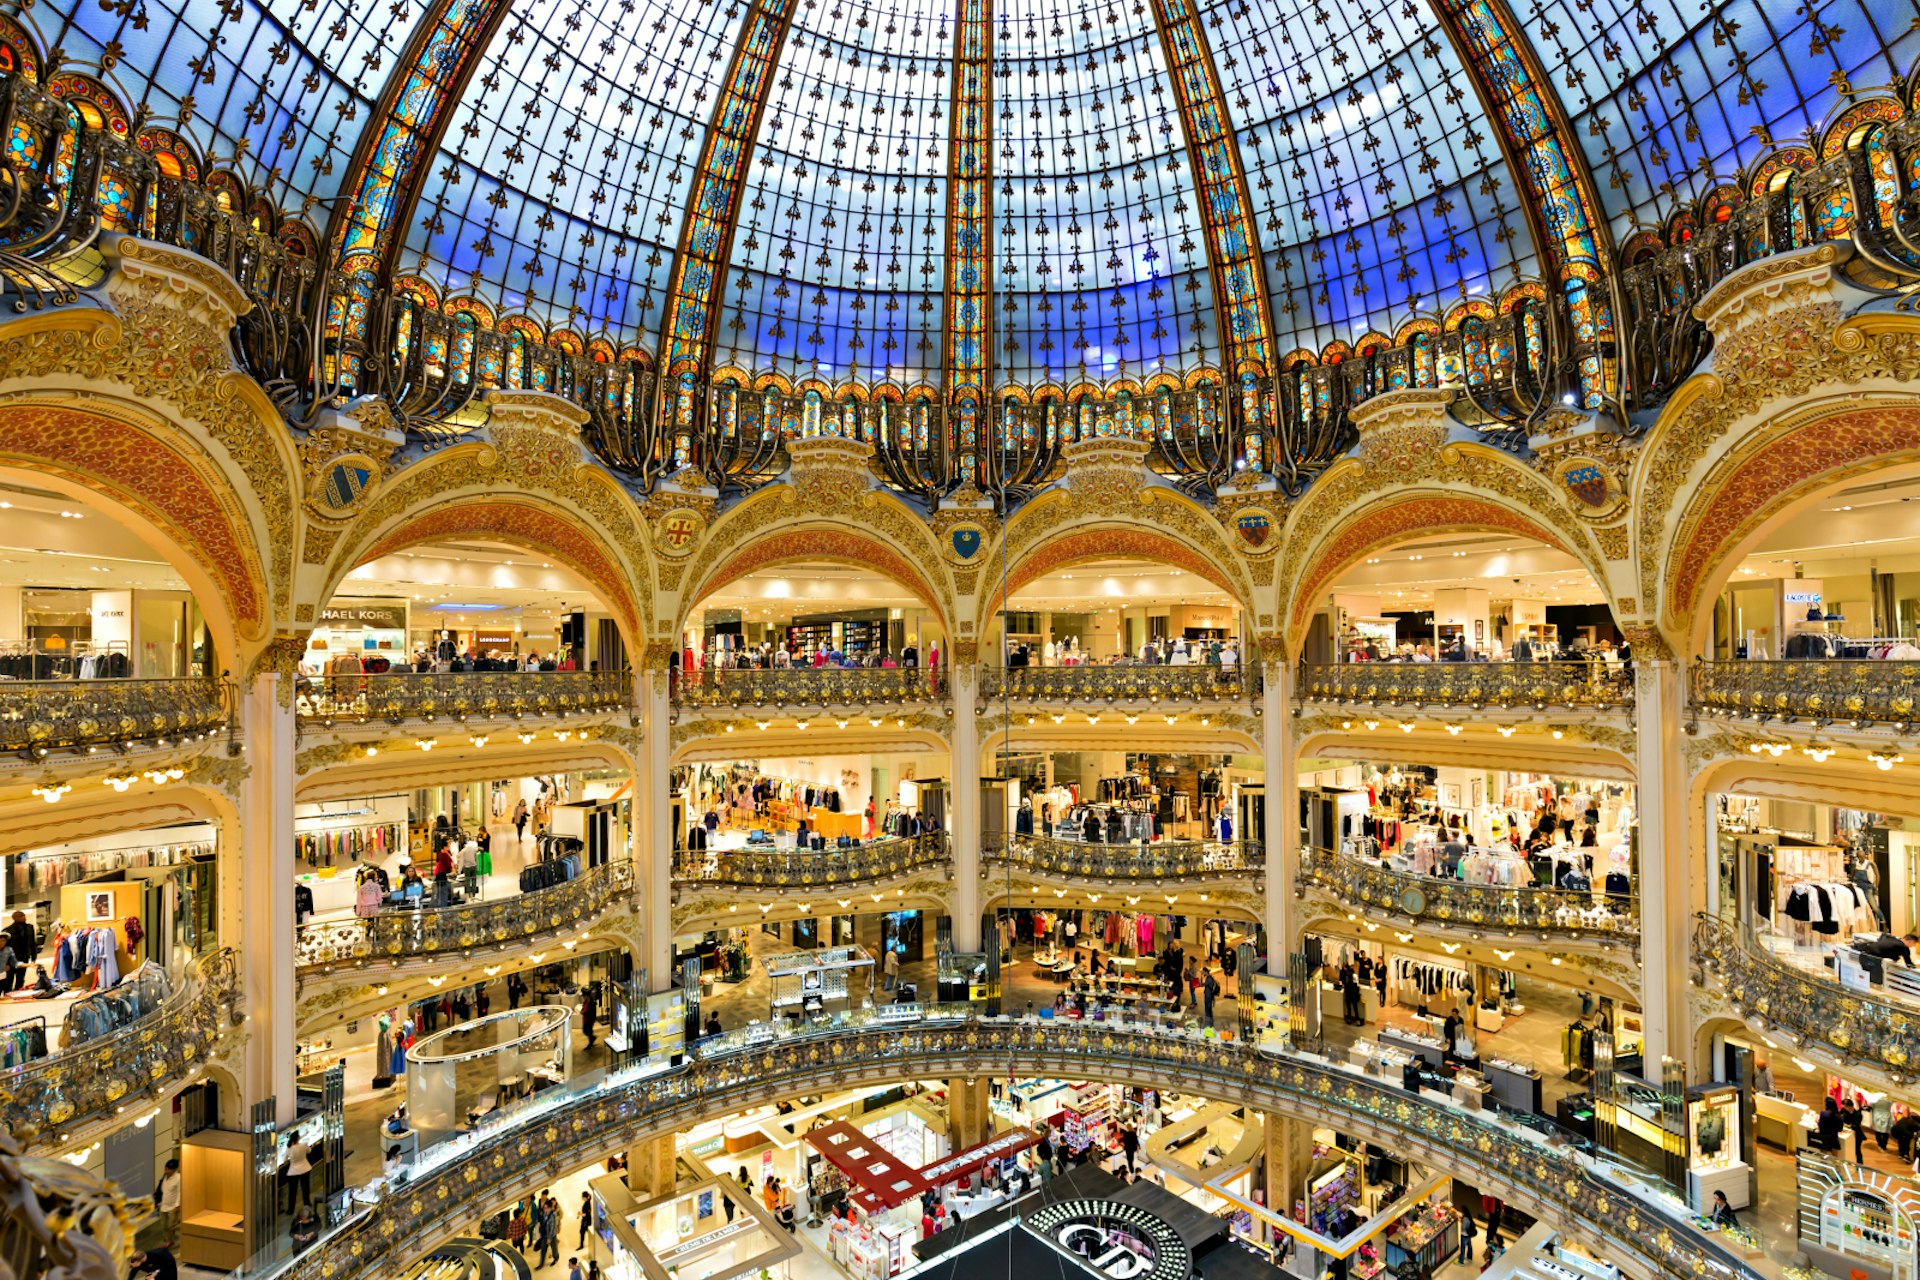 Stores and the famous domed ceiling of Galeries Lafayette in Paris